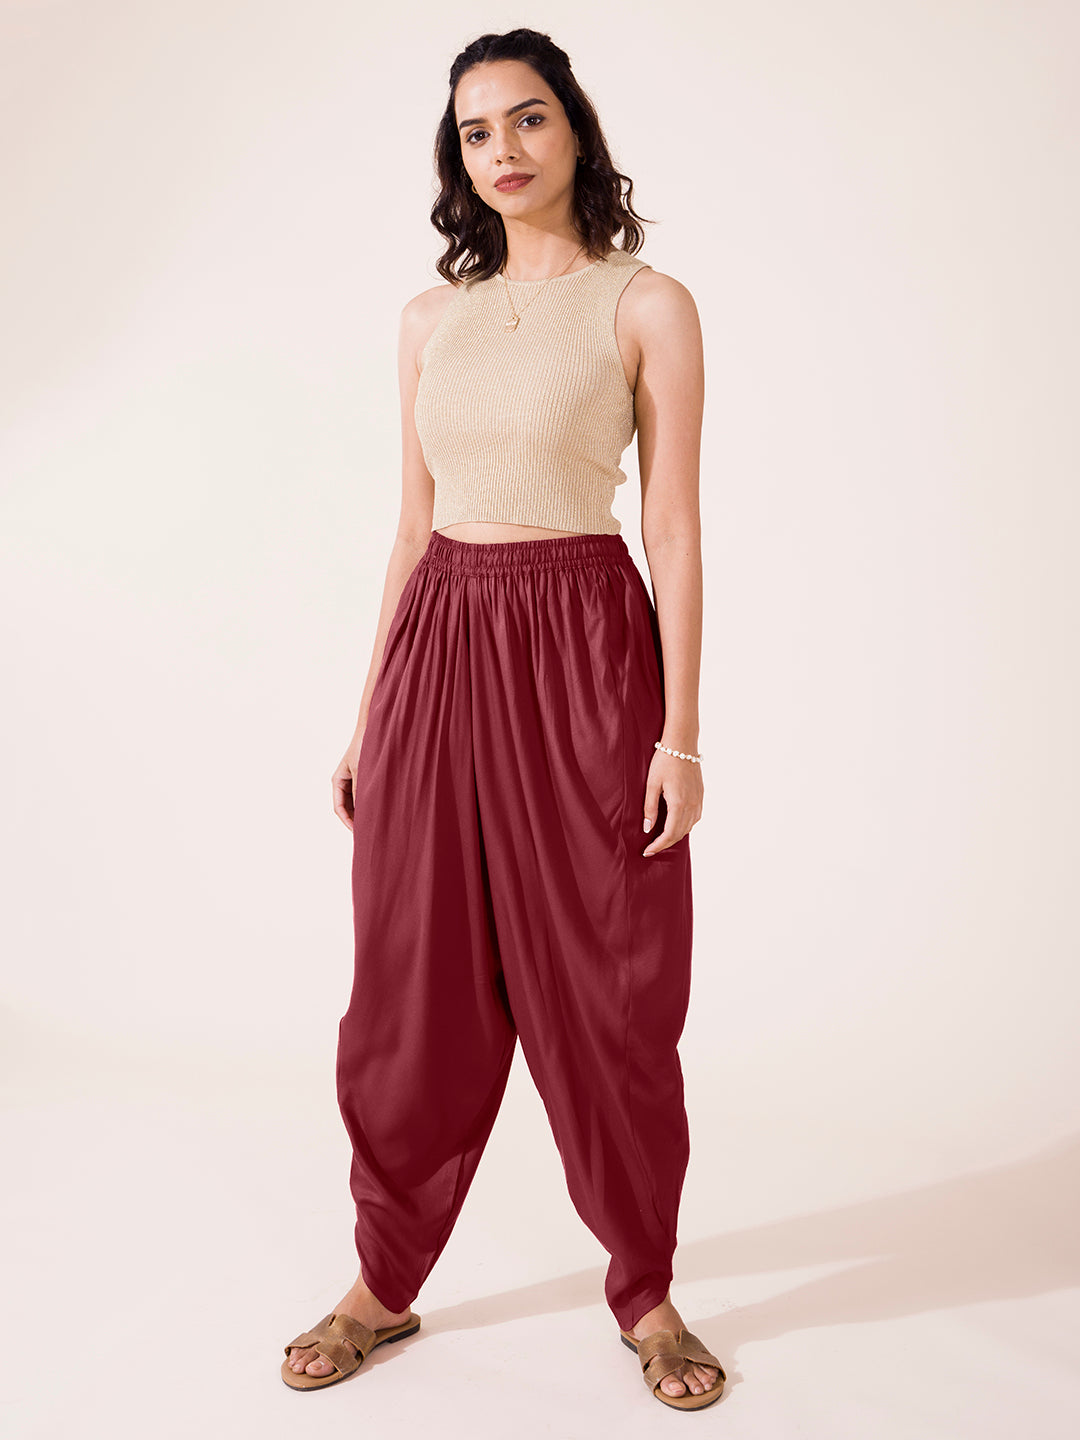 Buy Go Colors Red Solid Dhoti Pants - Dhotis for Women 4891815 | Myntra